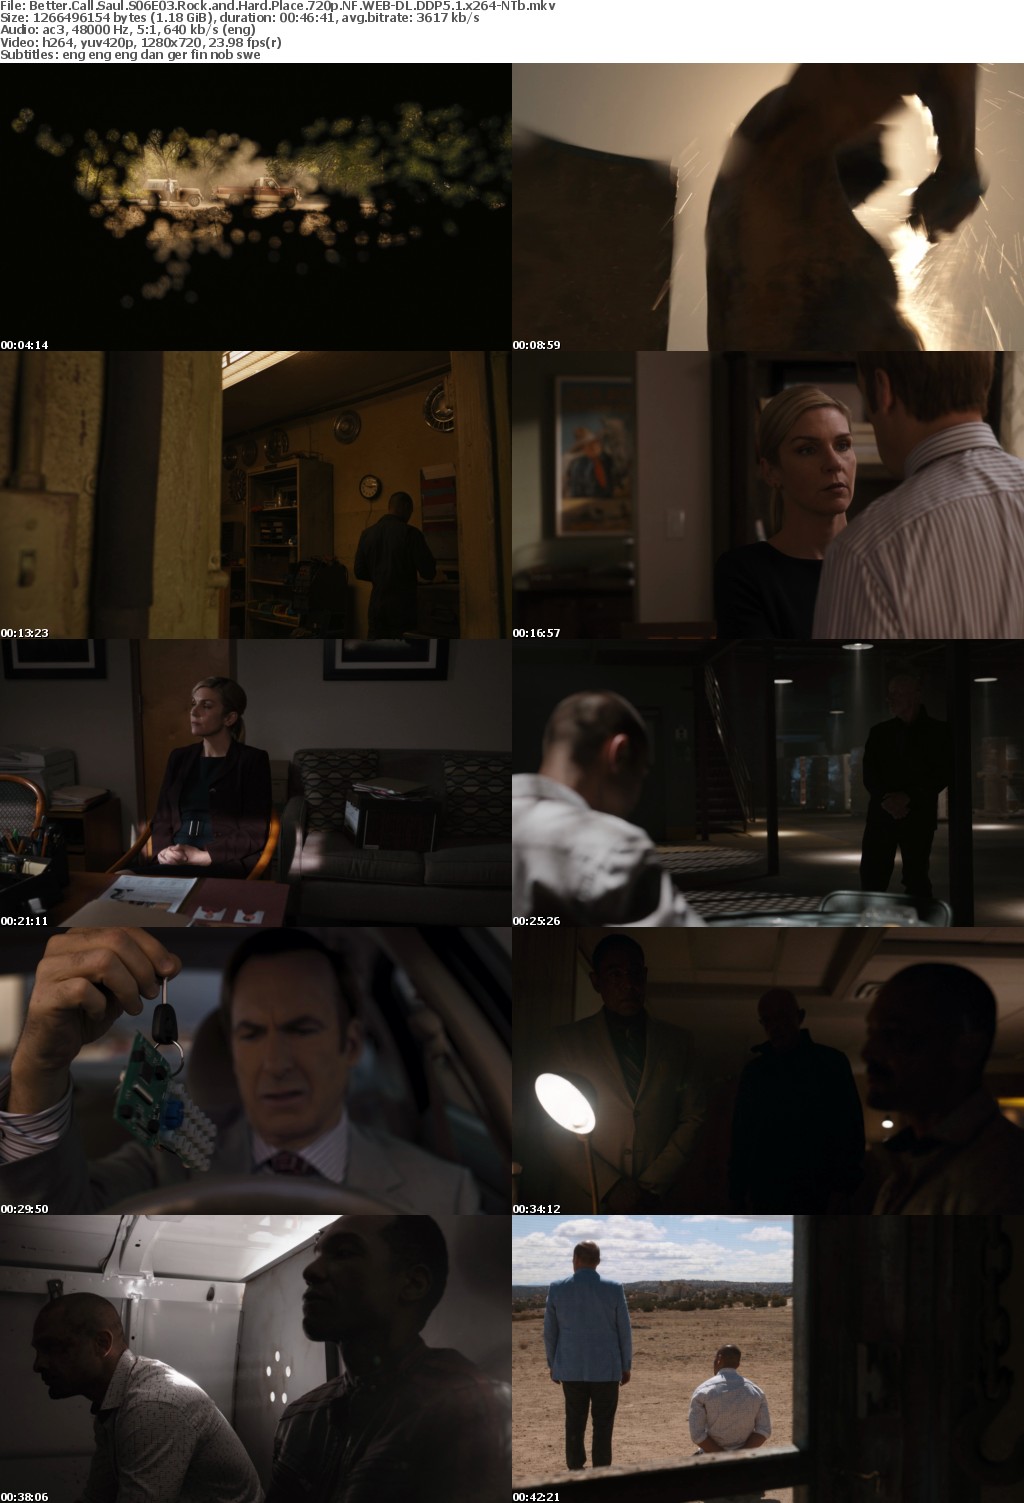 Better Call Saul S06E03 Rock and Hard Place 720p NF WEBRip DDP5 1 x264-NTb